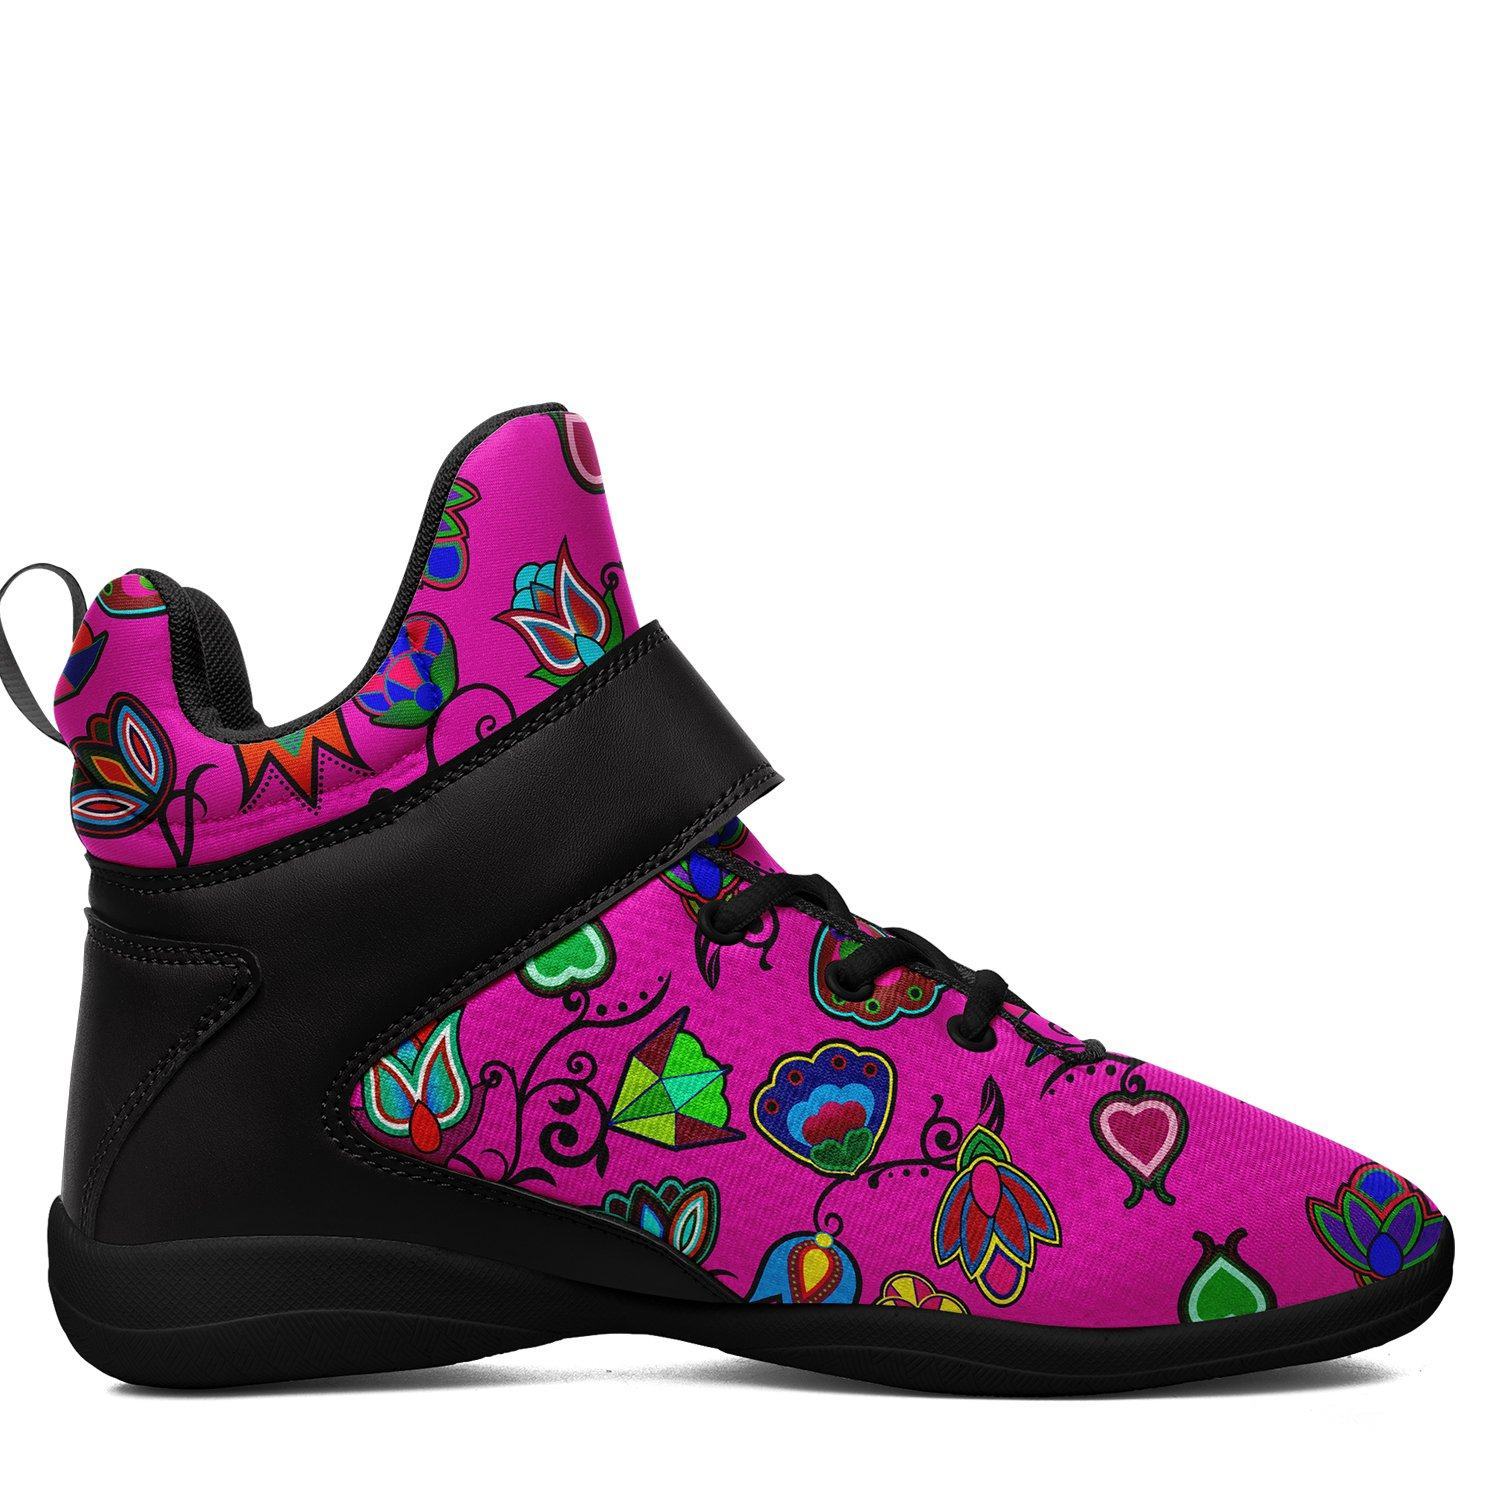 Indigenous Paisley Ipottaa Basketball / Sport High Top Shoes - Black Sole 49 Dzine 